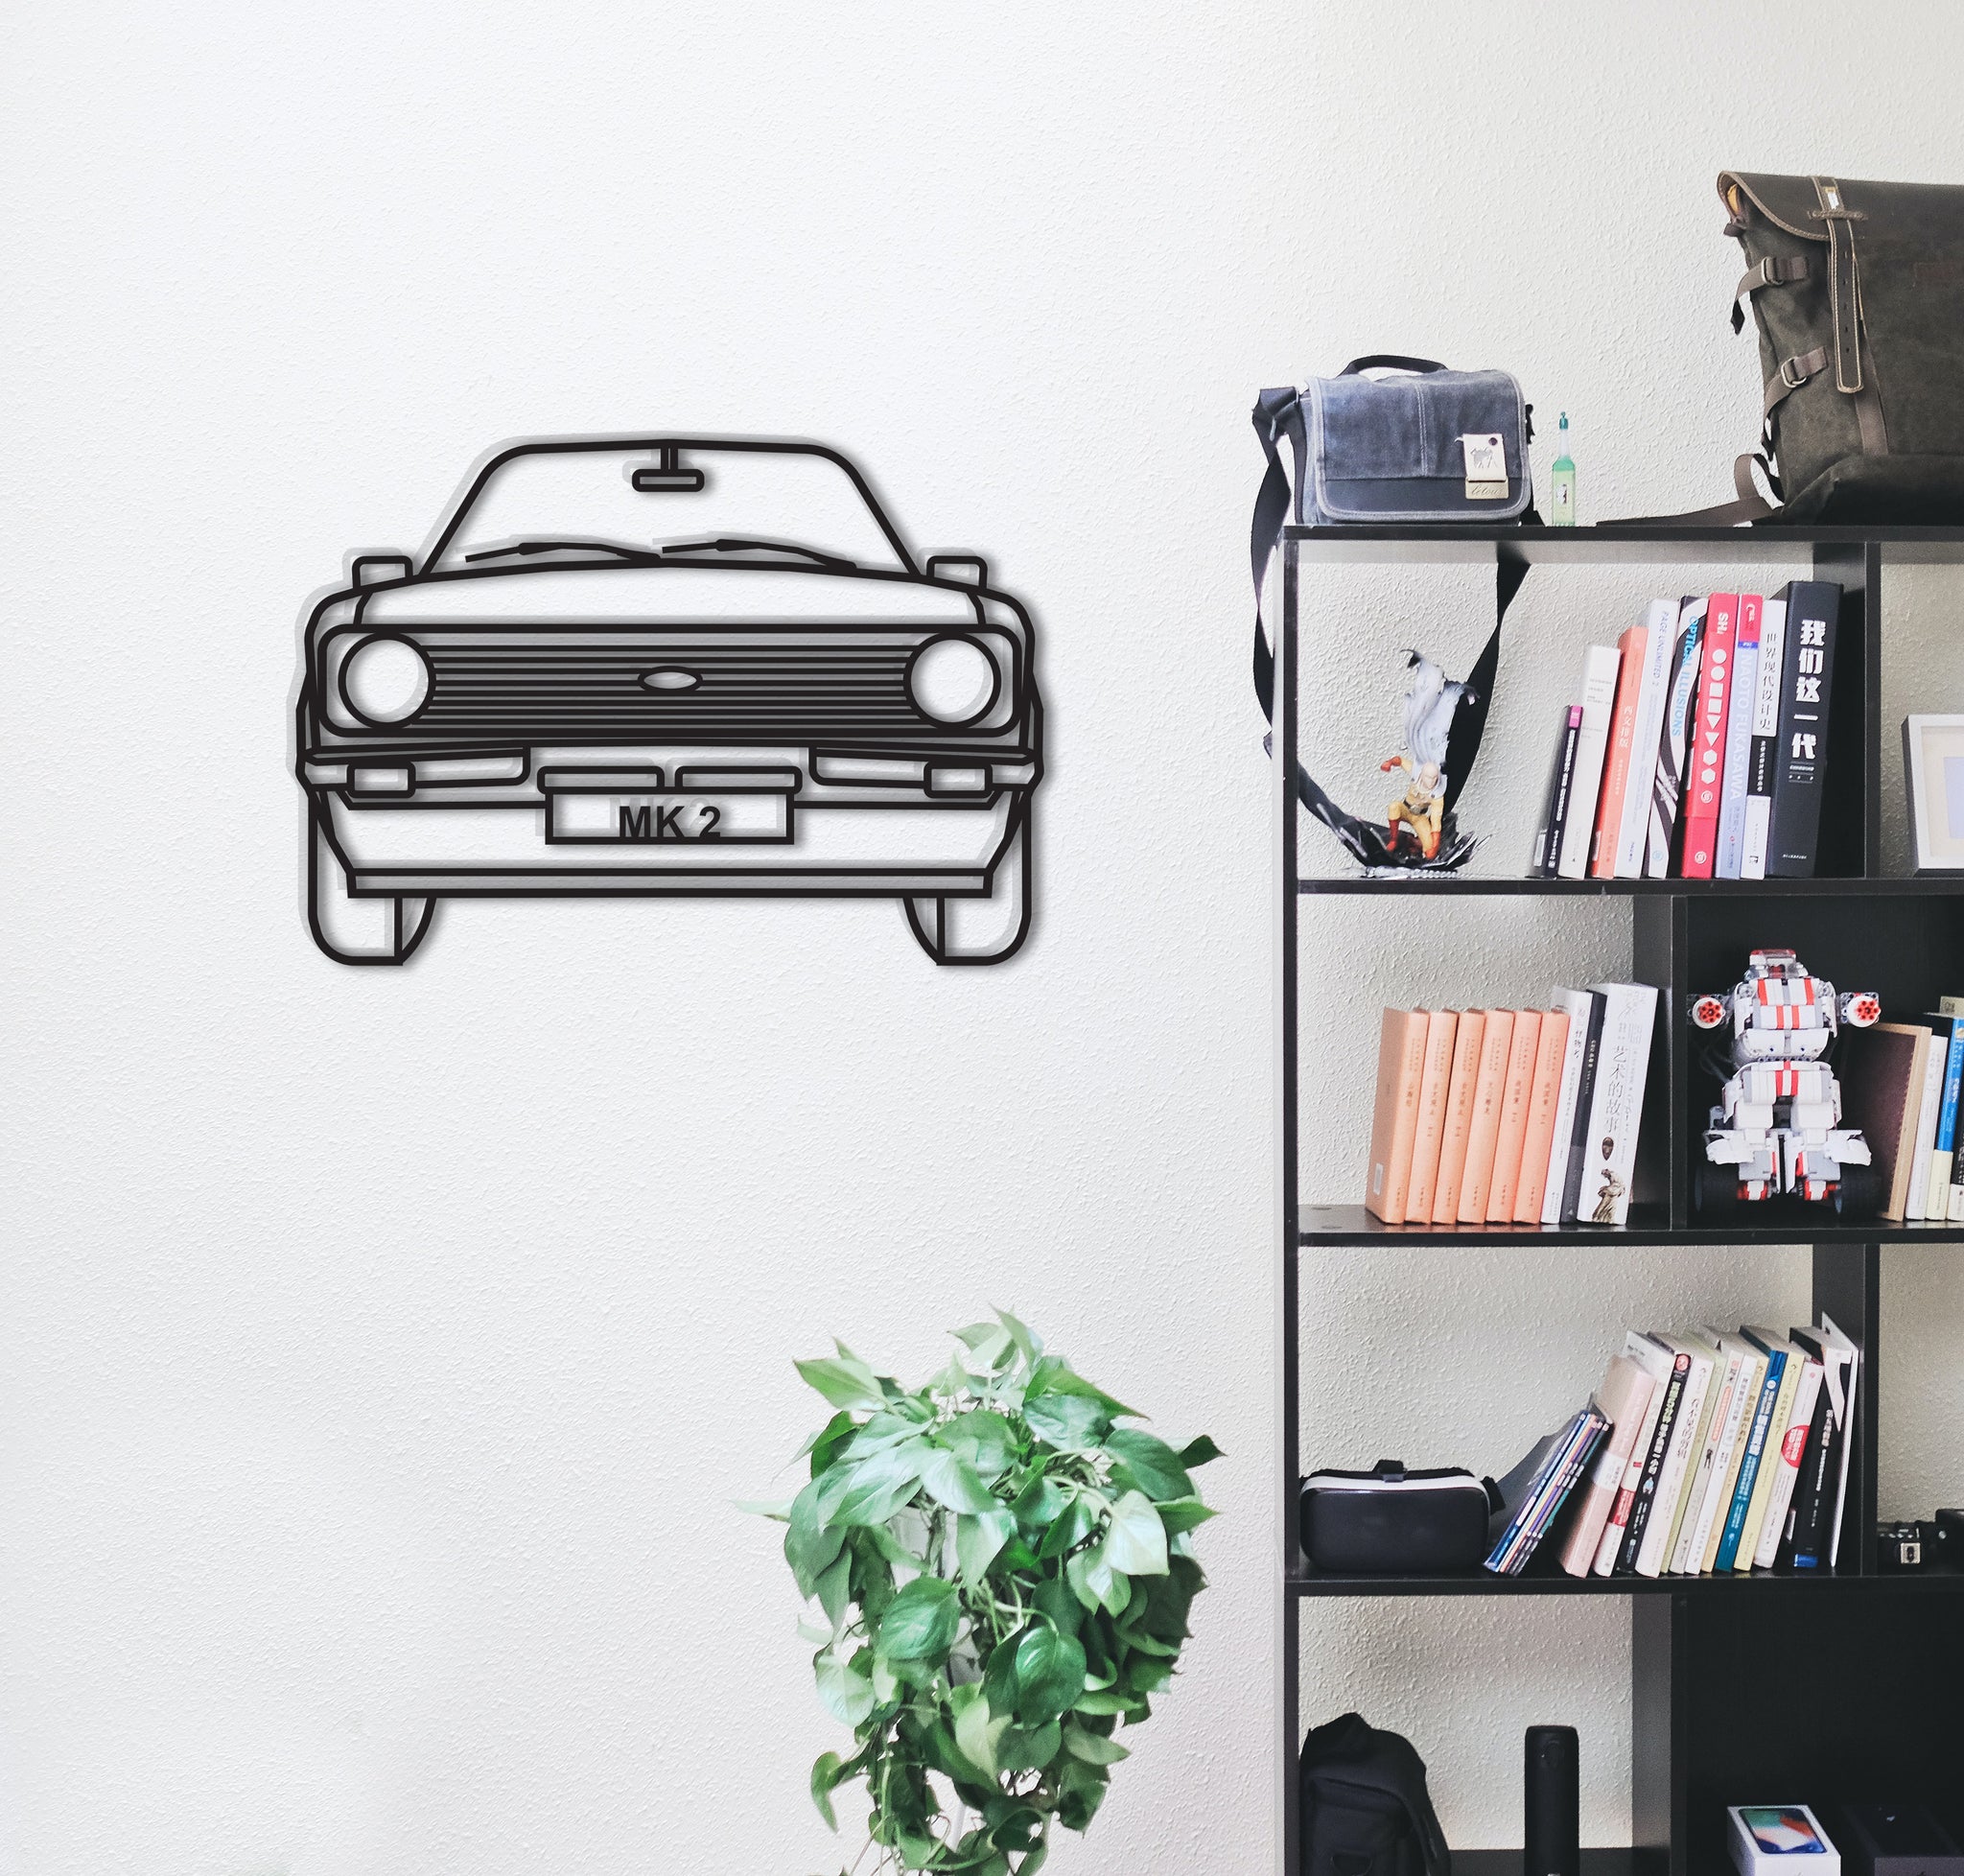 Ford Escort MK 2 Car - Wall Art Line Drawing 3D Wooden Cut Out